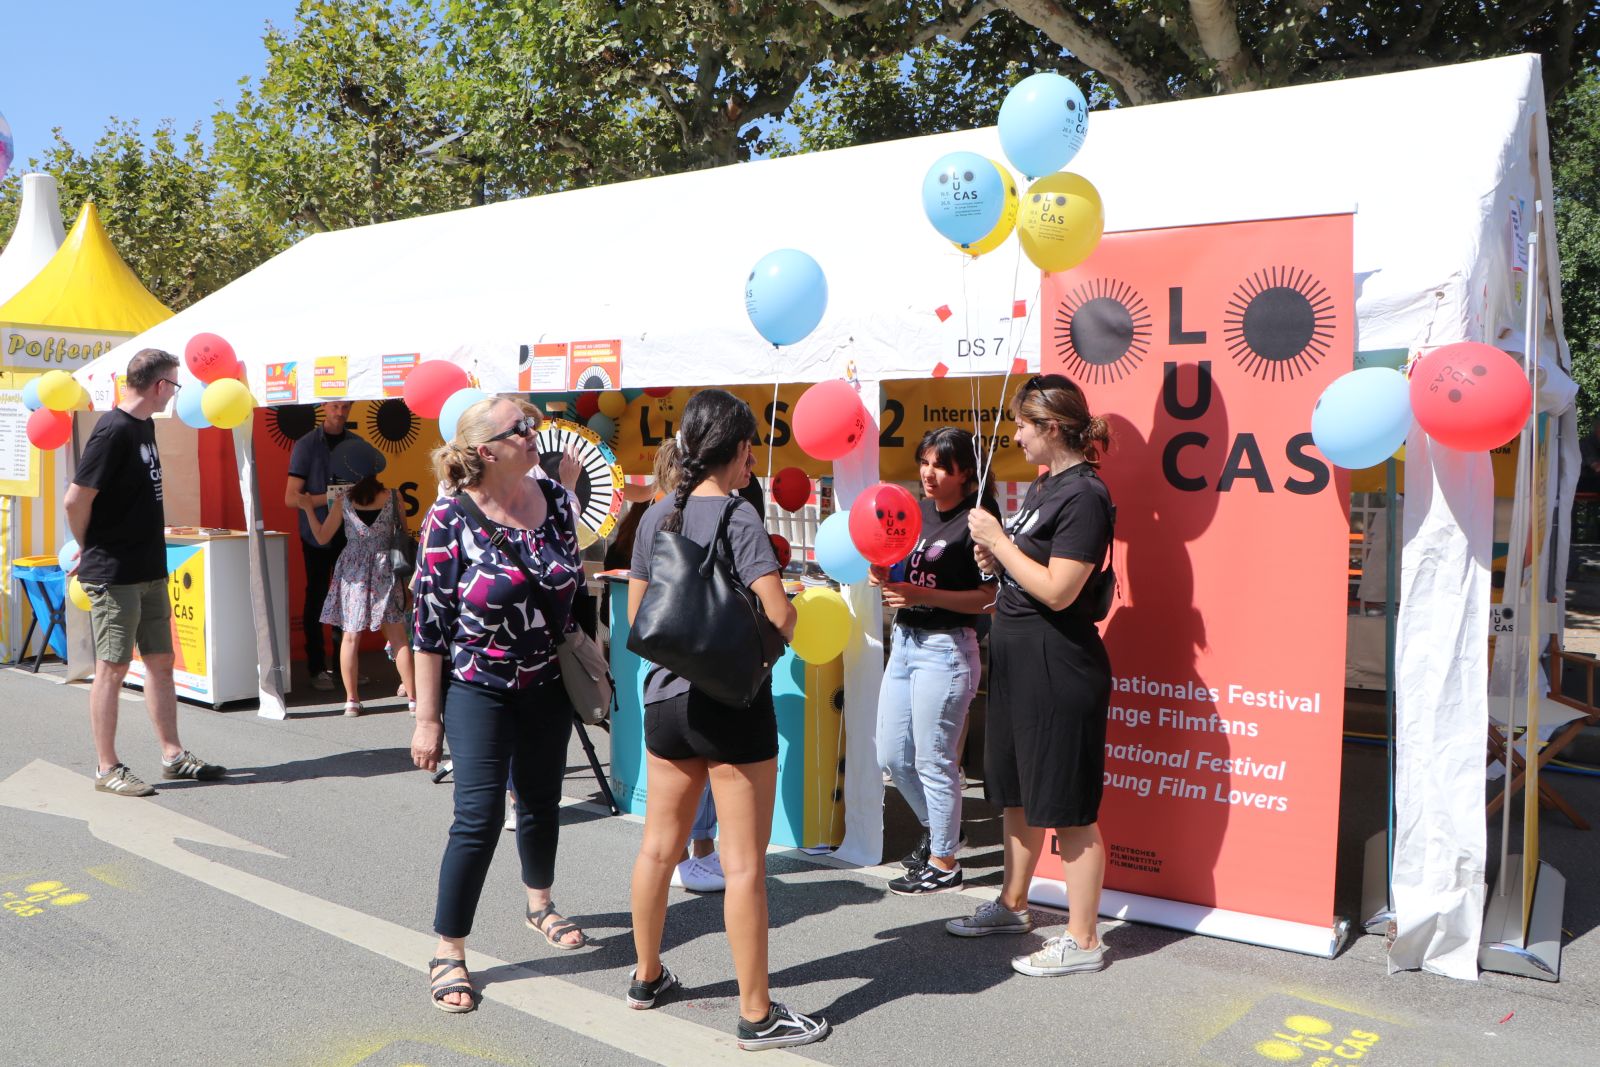 Booth of LUCAS - International Festival for Young Film Fans during the Museum Embankment Festival 2019